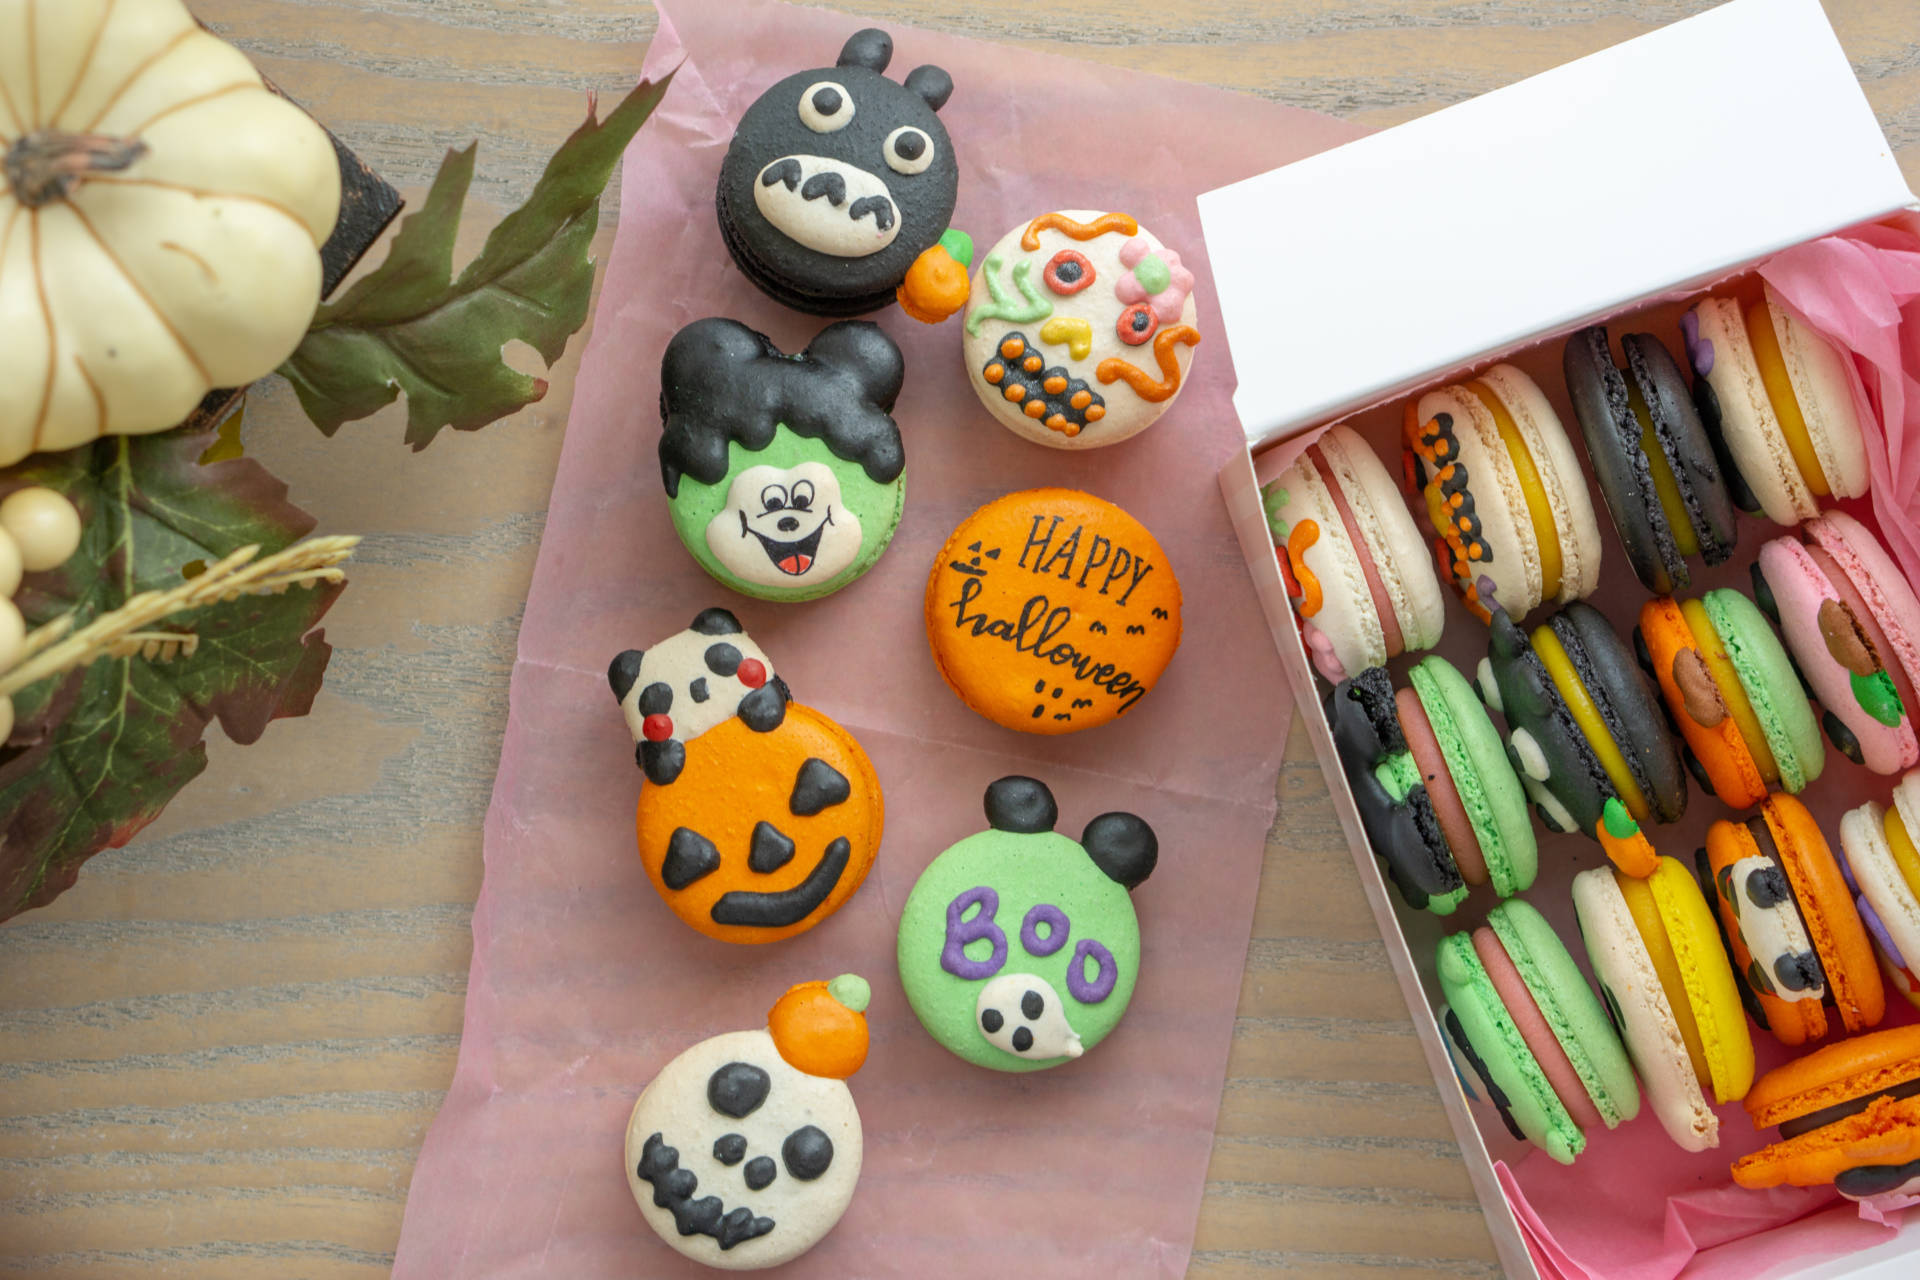 An assortment of Halloween macarons in guava, strawberry, chocolate, mango and more.